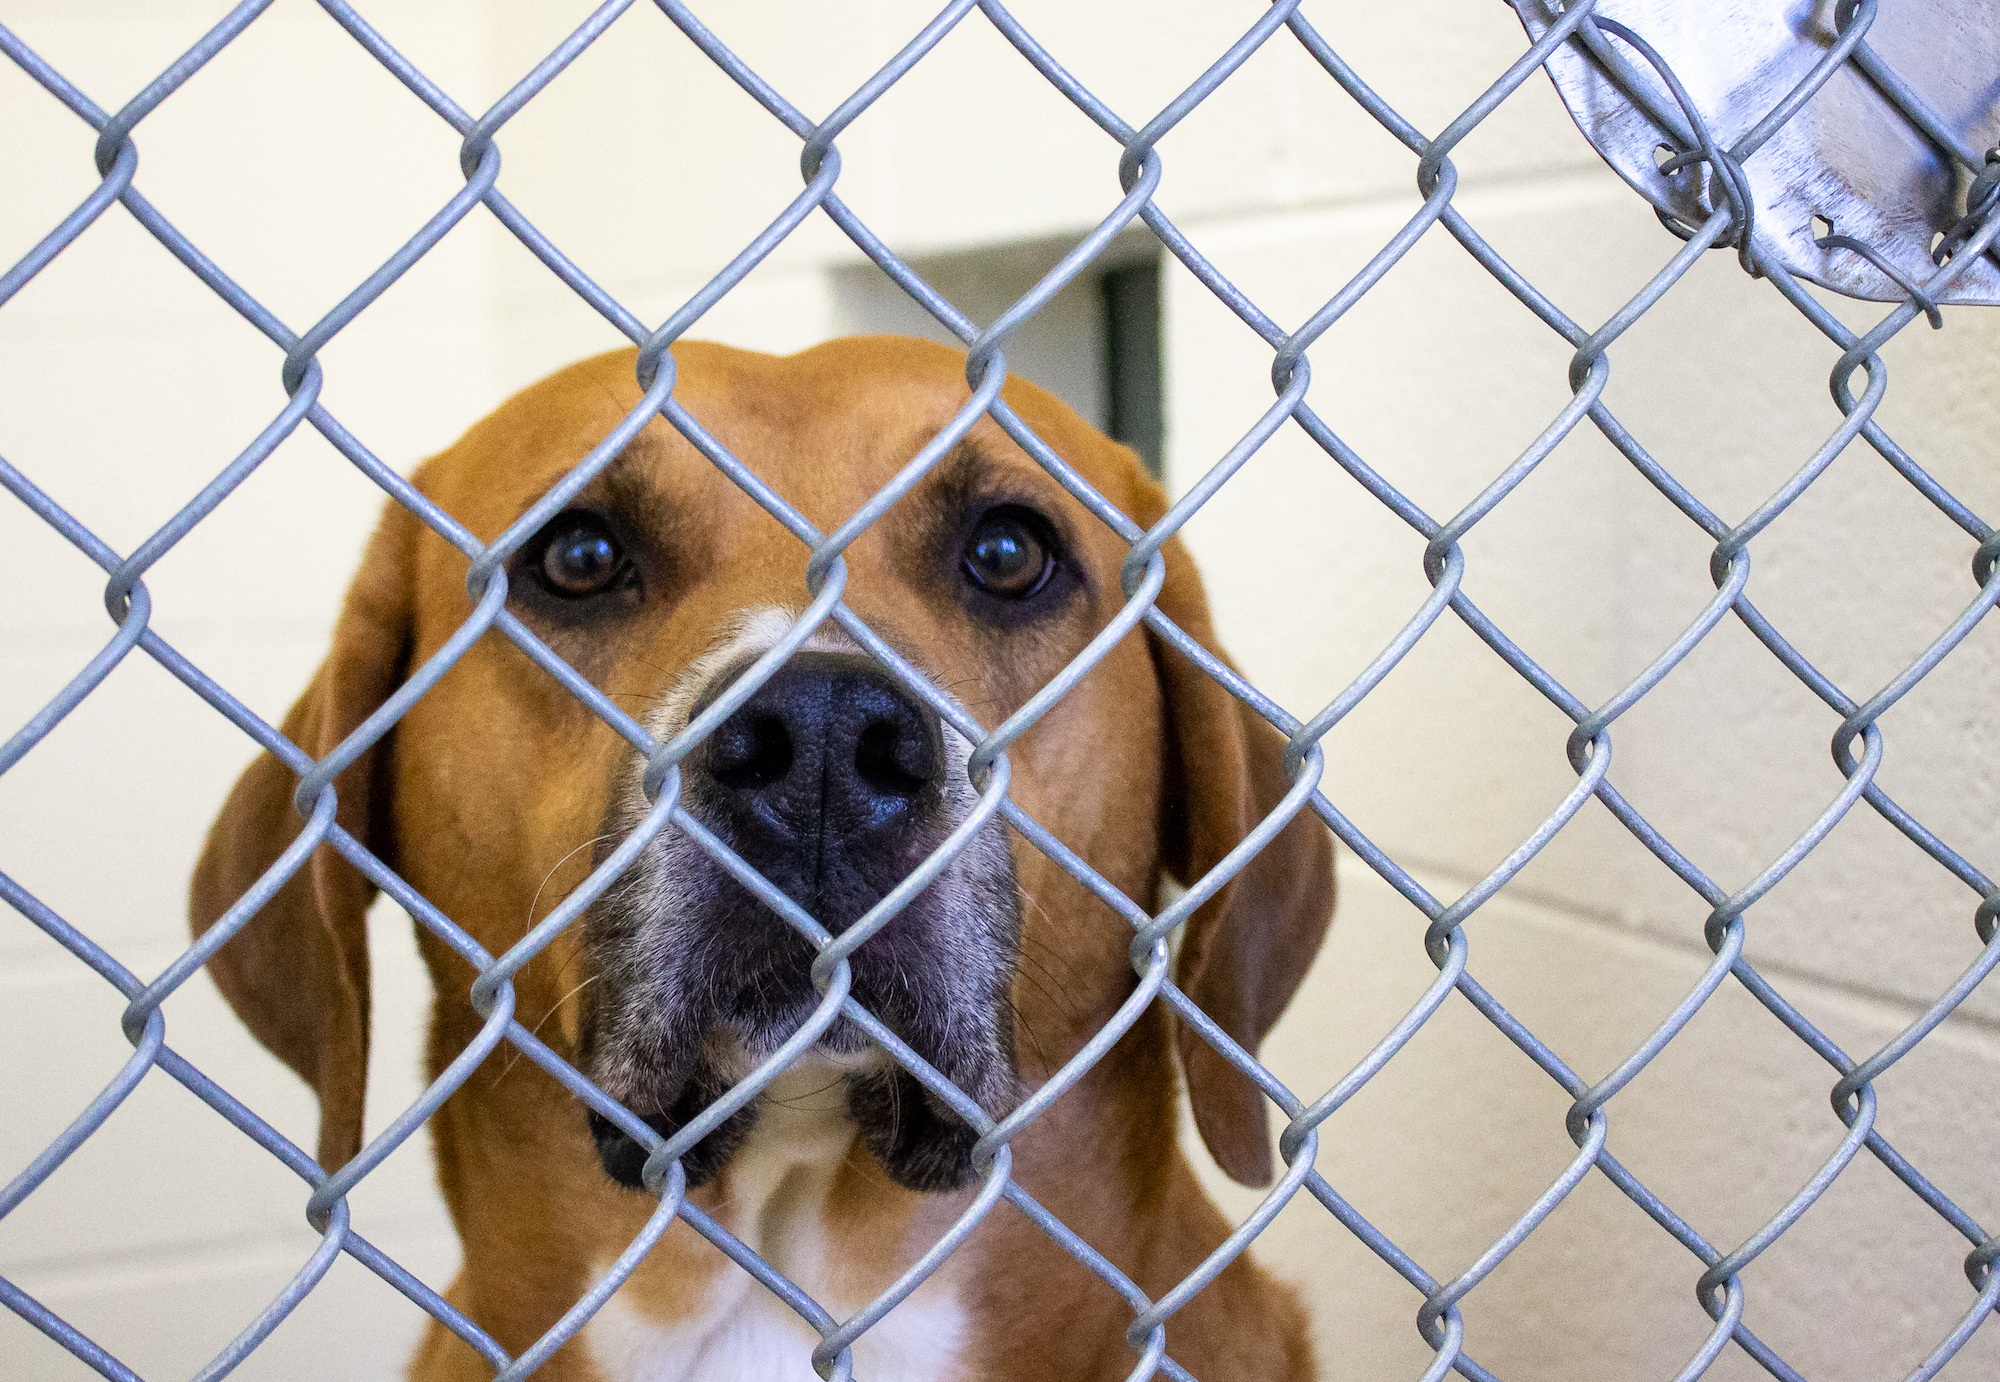 Are there kill shelters in MA?